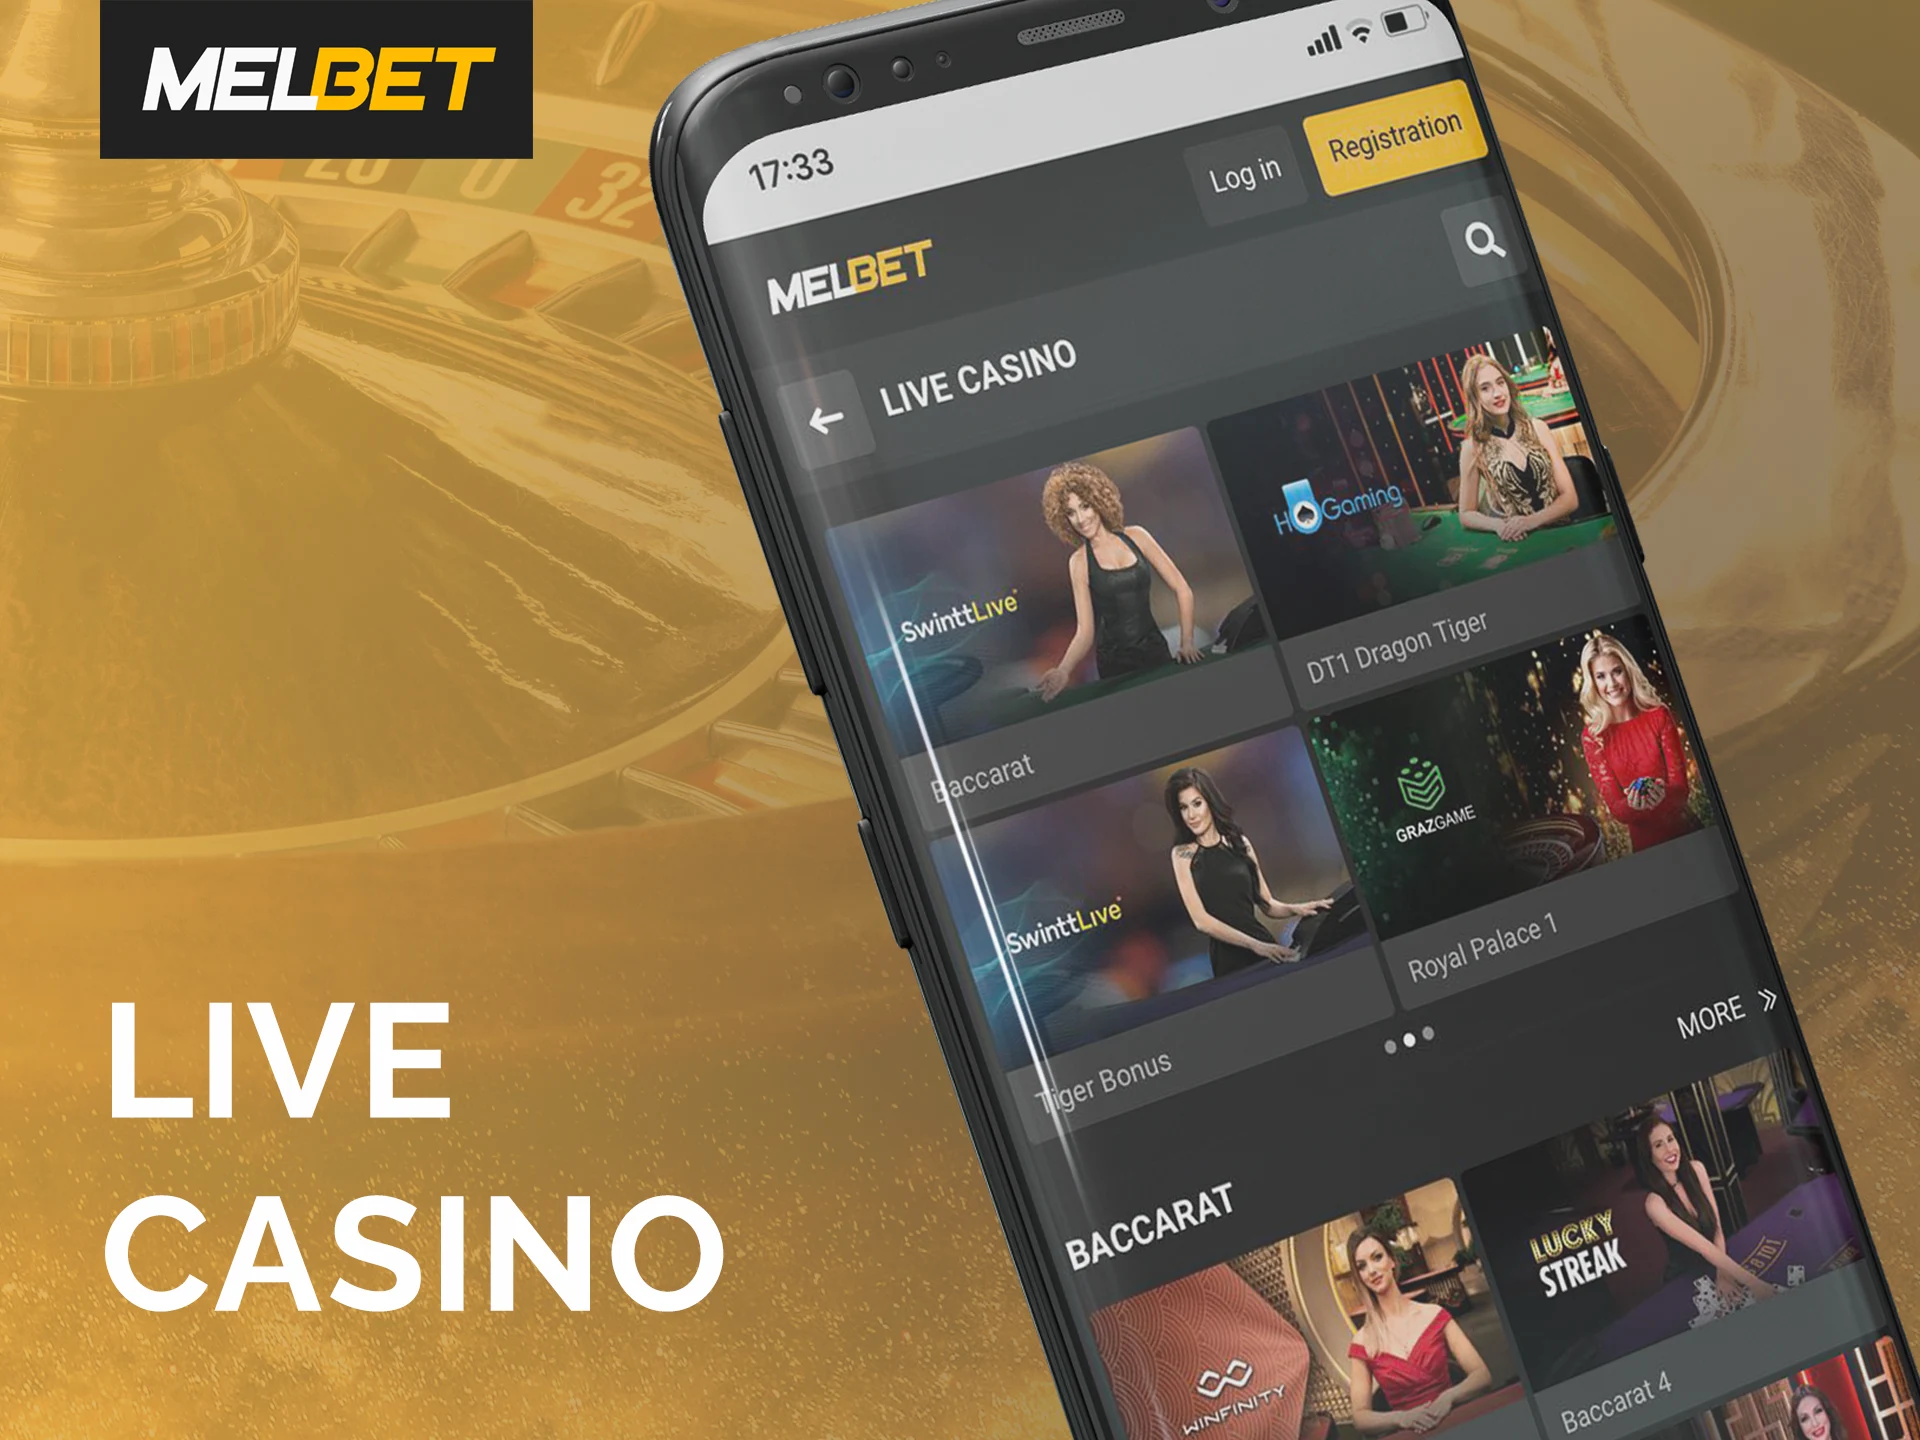 Discover a new way to enjoy the thrill of casino gaming from the comfort of your own device by giving the live casino feature on the Melbet app a try right away.